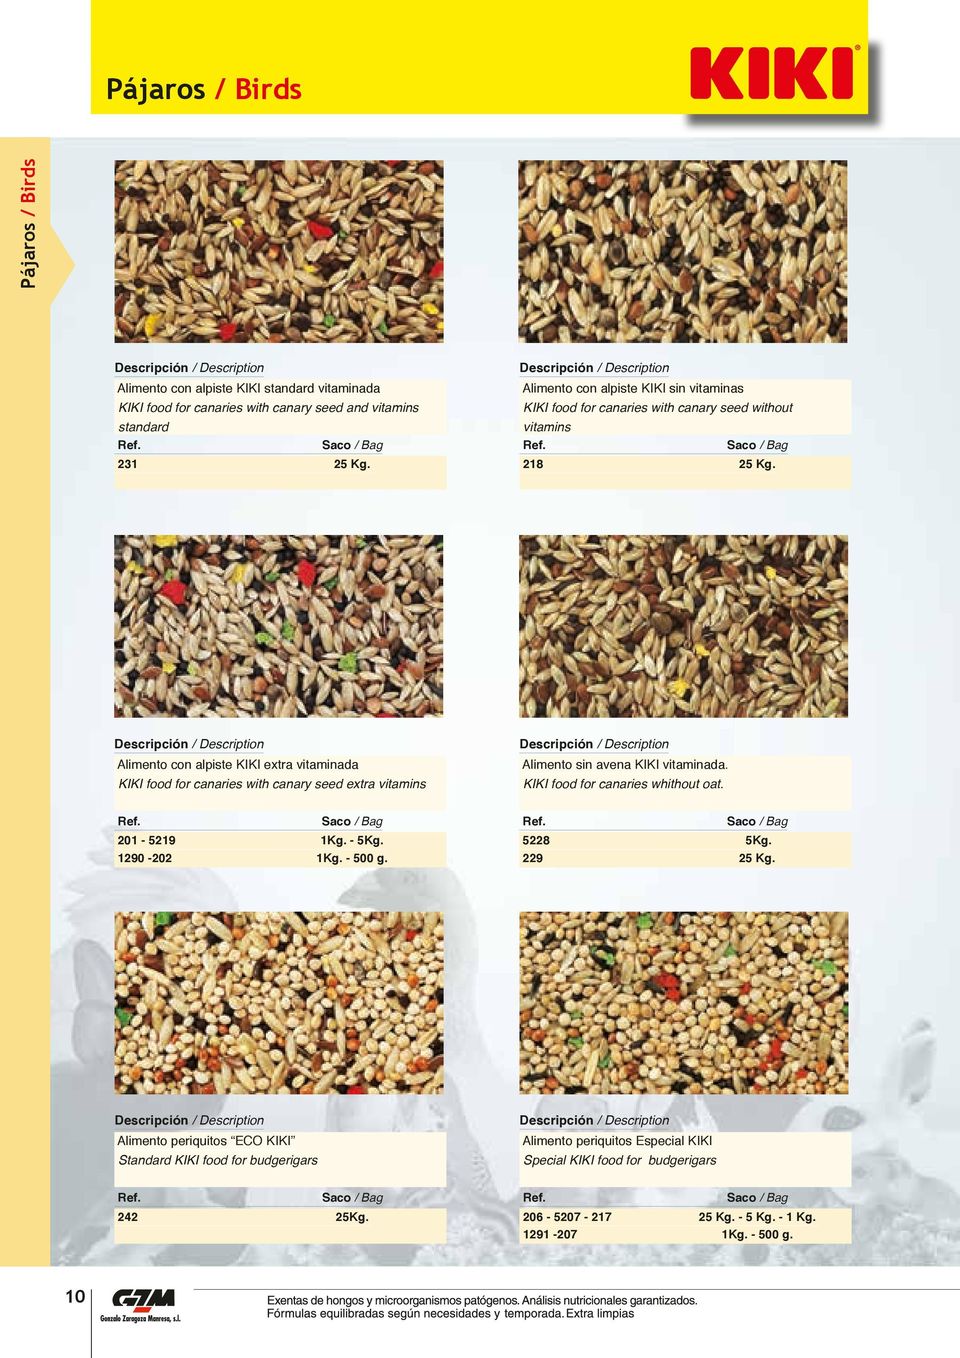 Alimento con alpiste KIKI extra vitaminada KIKI food for canaries with canary seed extra vitamins Alimento sin avena KIKI vitaminada. KIKI food for canaries whithout oat. Ref.